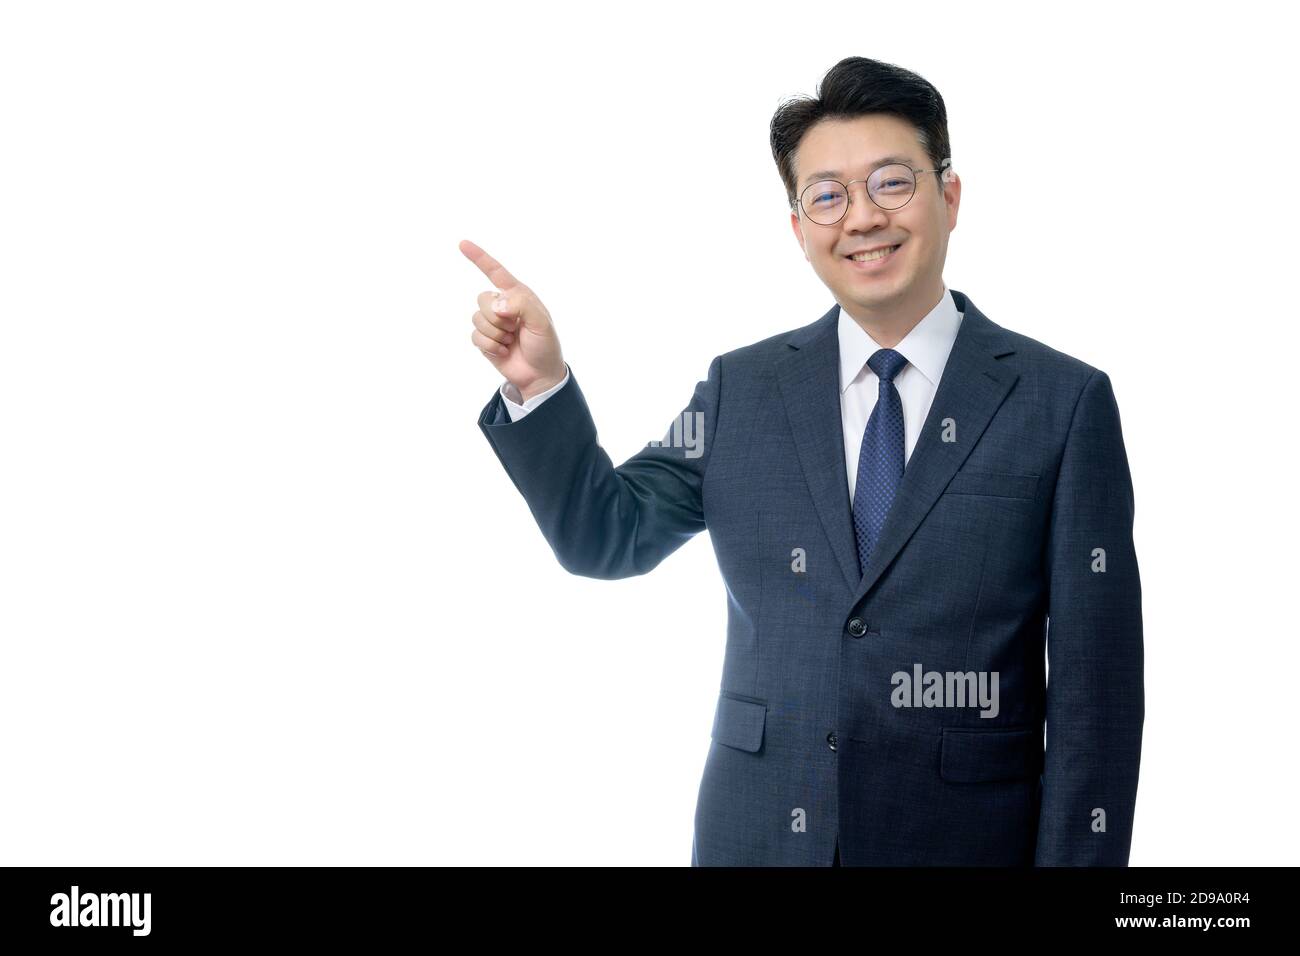 White background and gestures of an Asian middle-aged businessman. Stock Photo